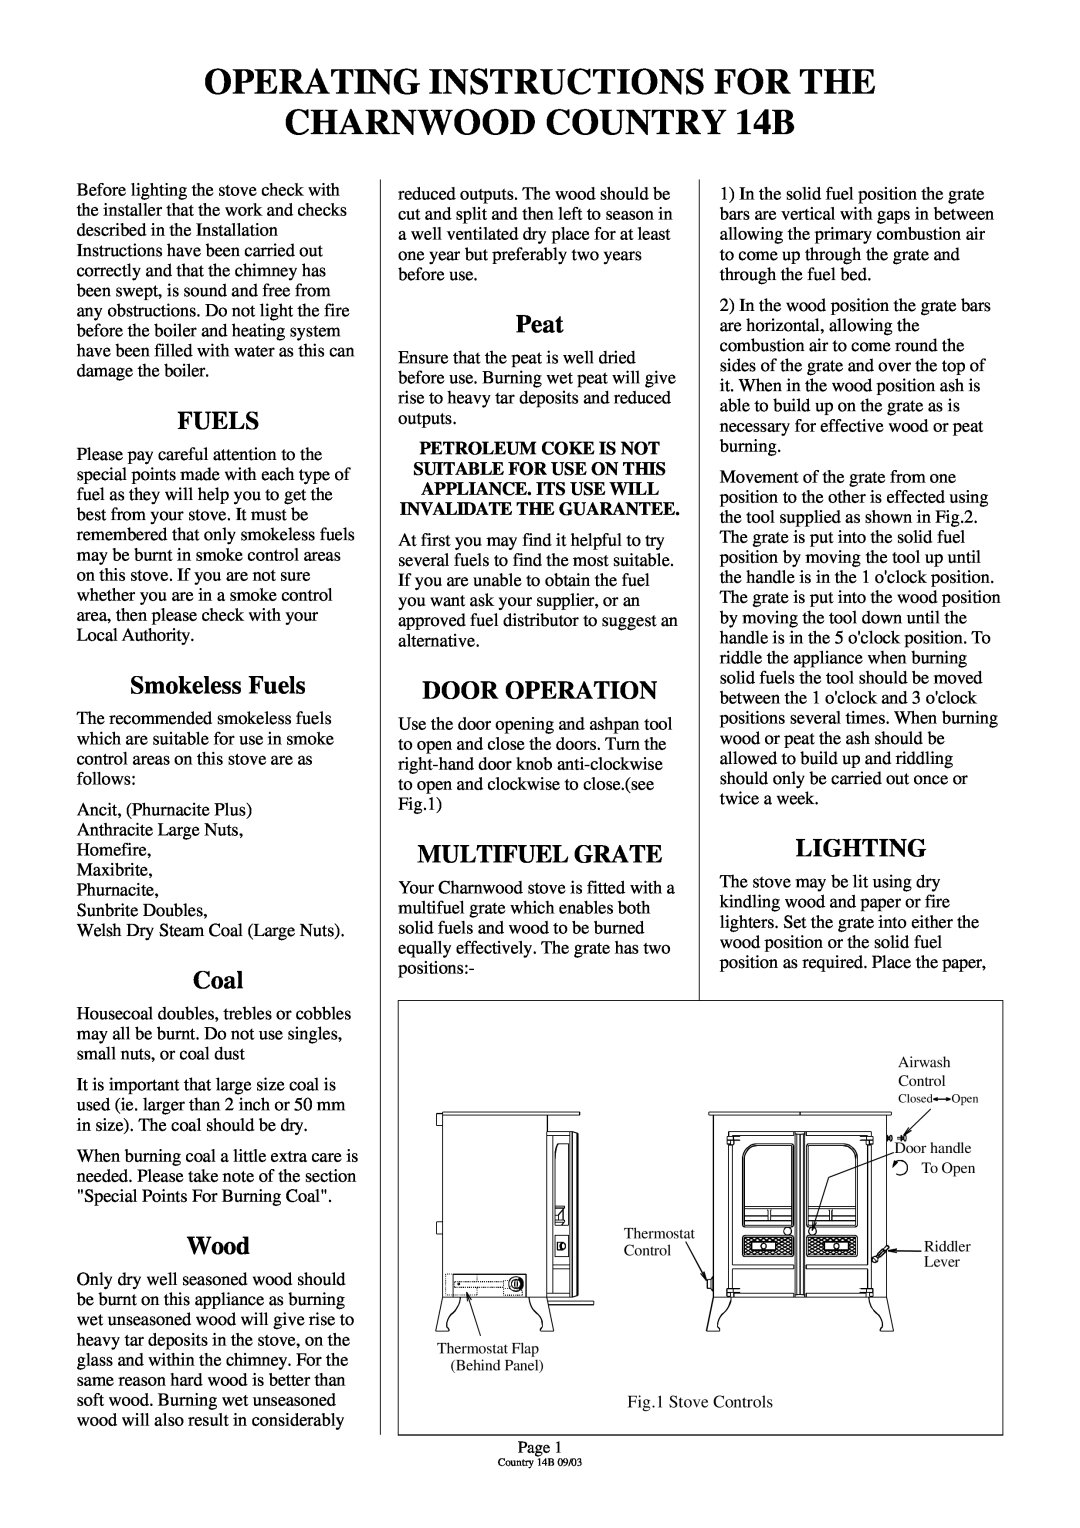 Charnwood Country 14B Operating Instructions For The, CHARNWOOD COUNTRY 14B, Smokeless Fuels, Peat, Door Operation 